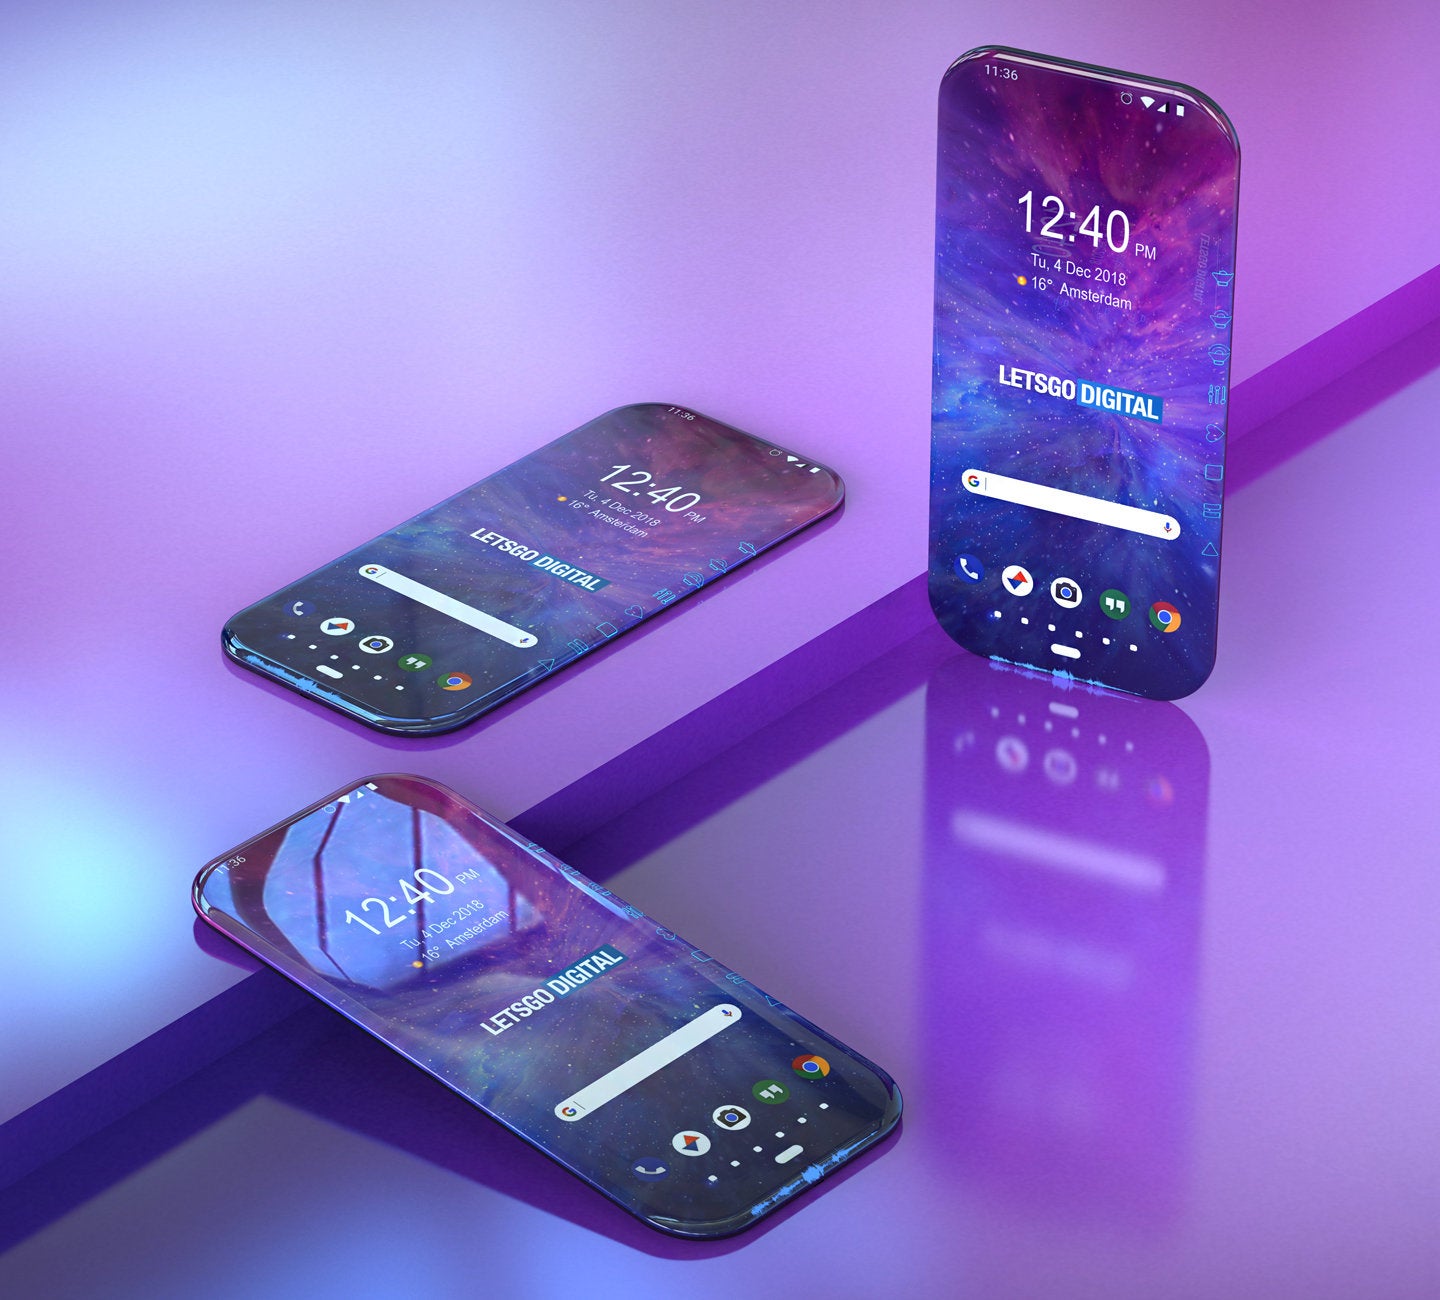 3D renders based on the patent's schematics - Samsung's newest smartphone patent offers a glimpse into the not so distant future